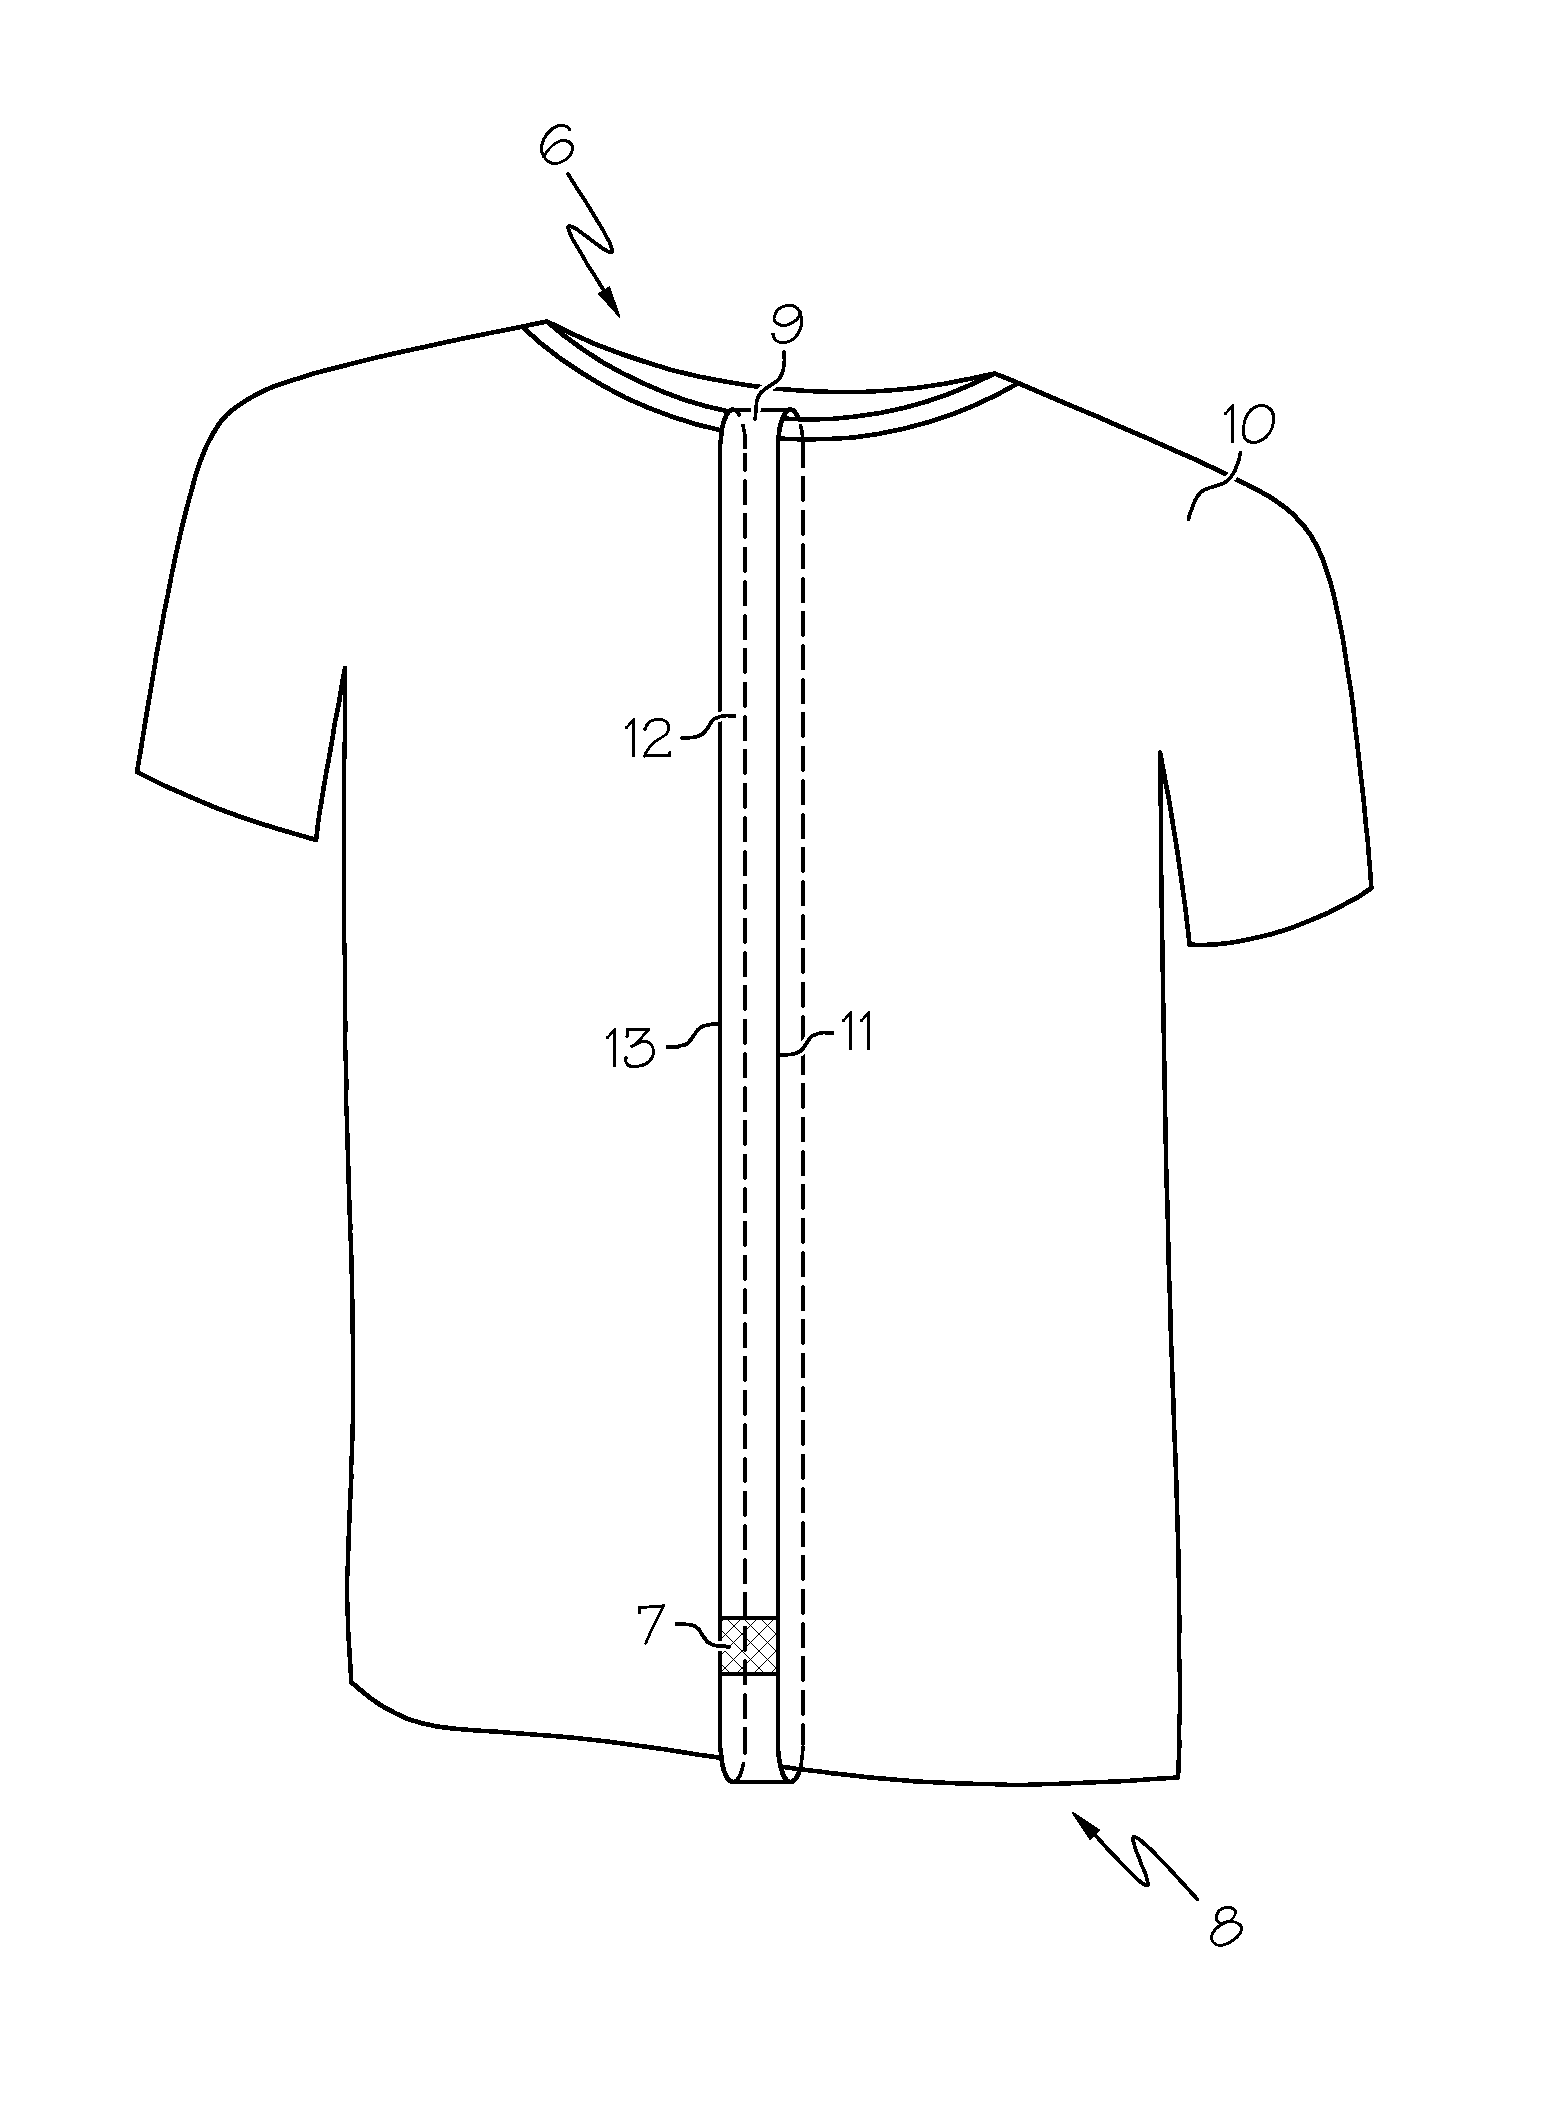 Antifraud device for garments and other consumer products and devices and system and method related thereto